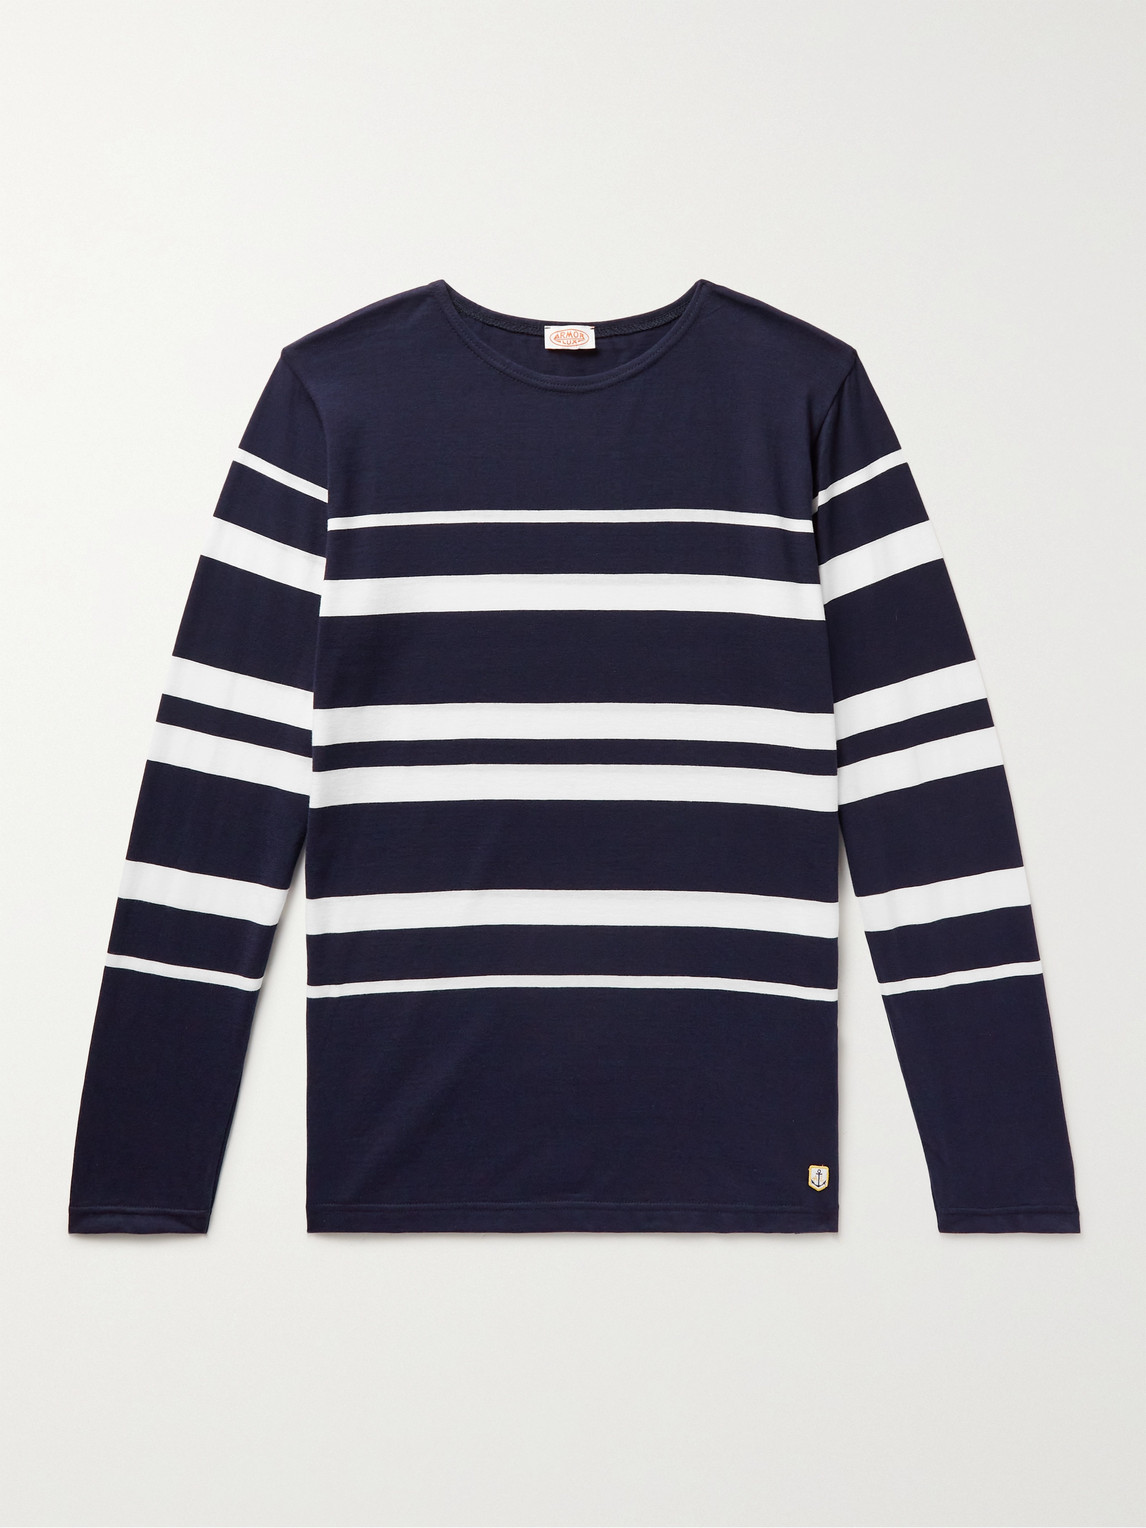 Armor-lux L/s Sailor Stripe Tee Shirt - Navy/white In Blue